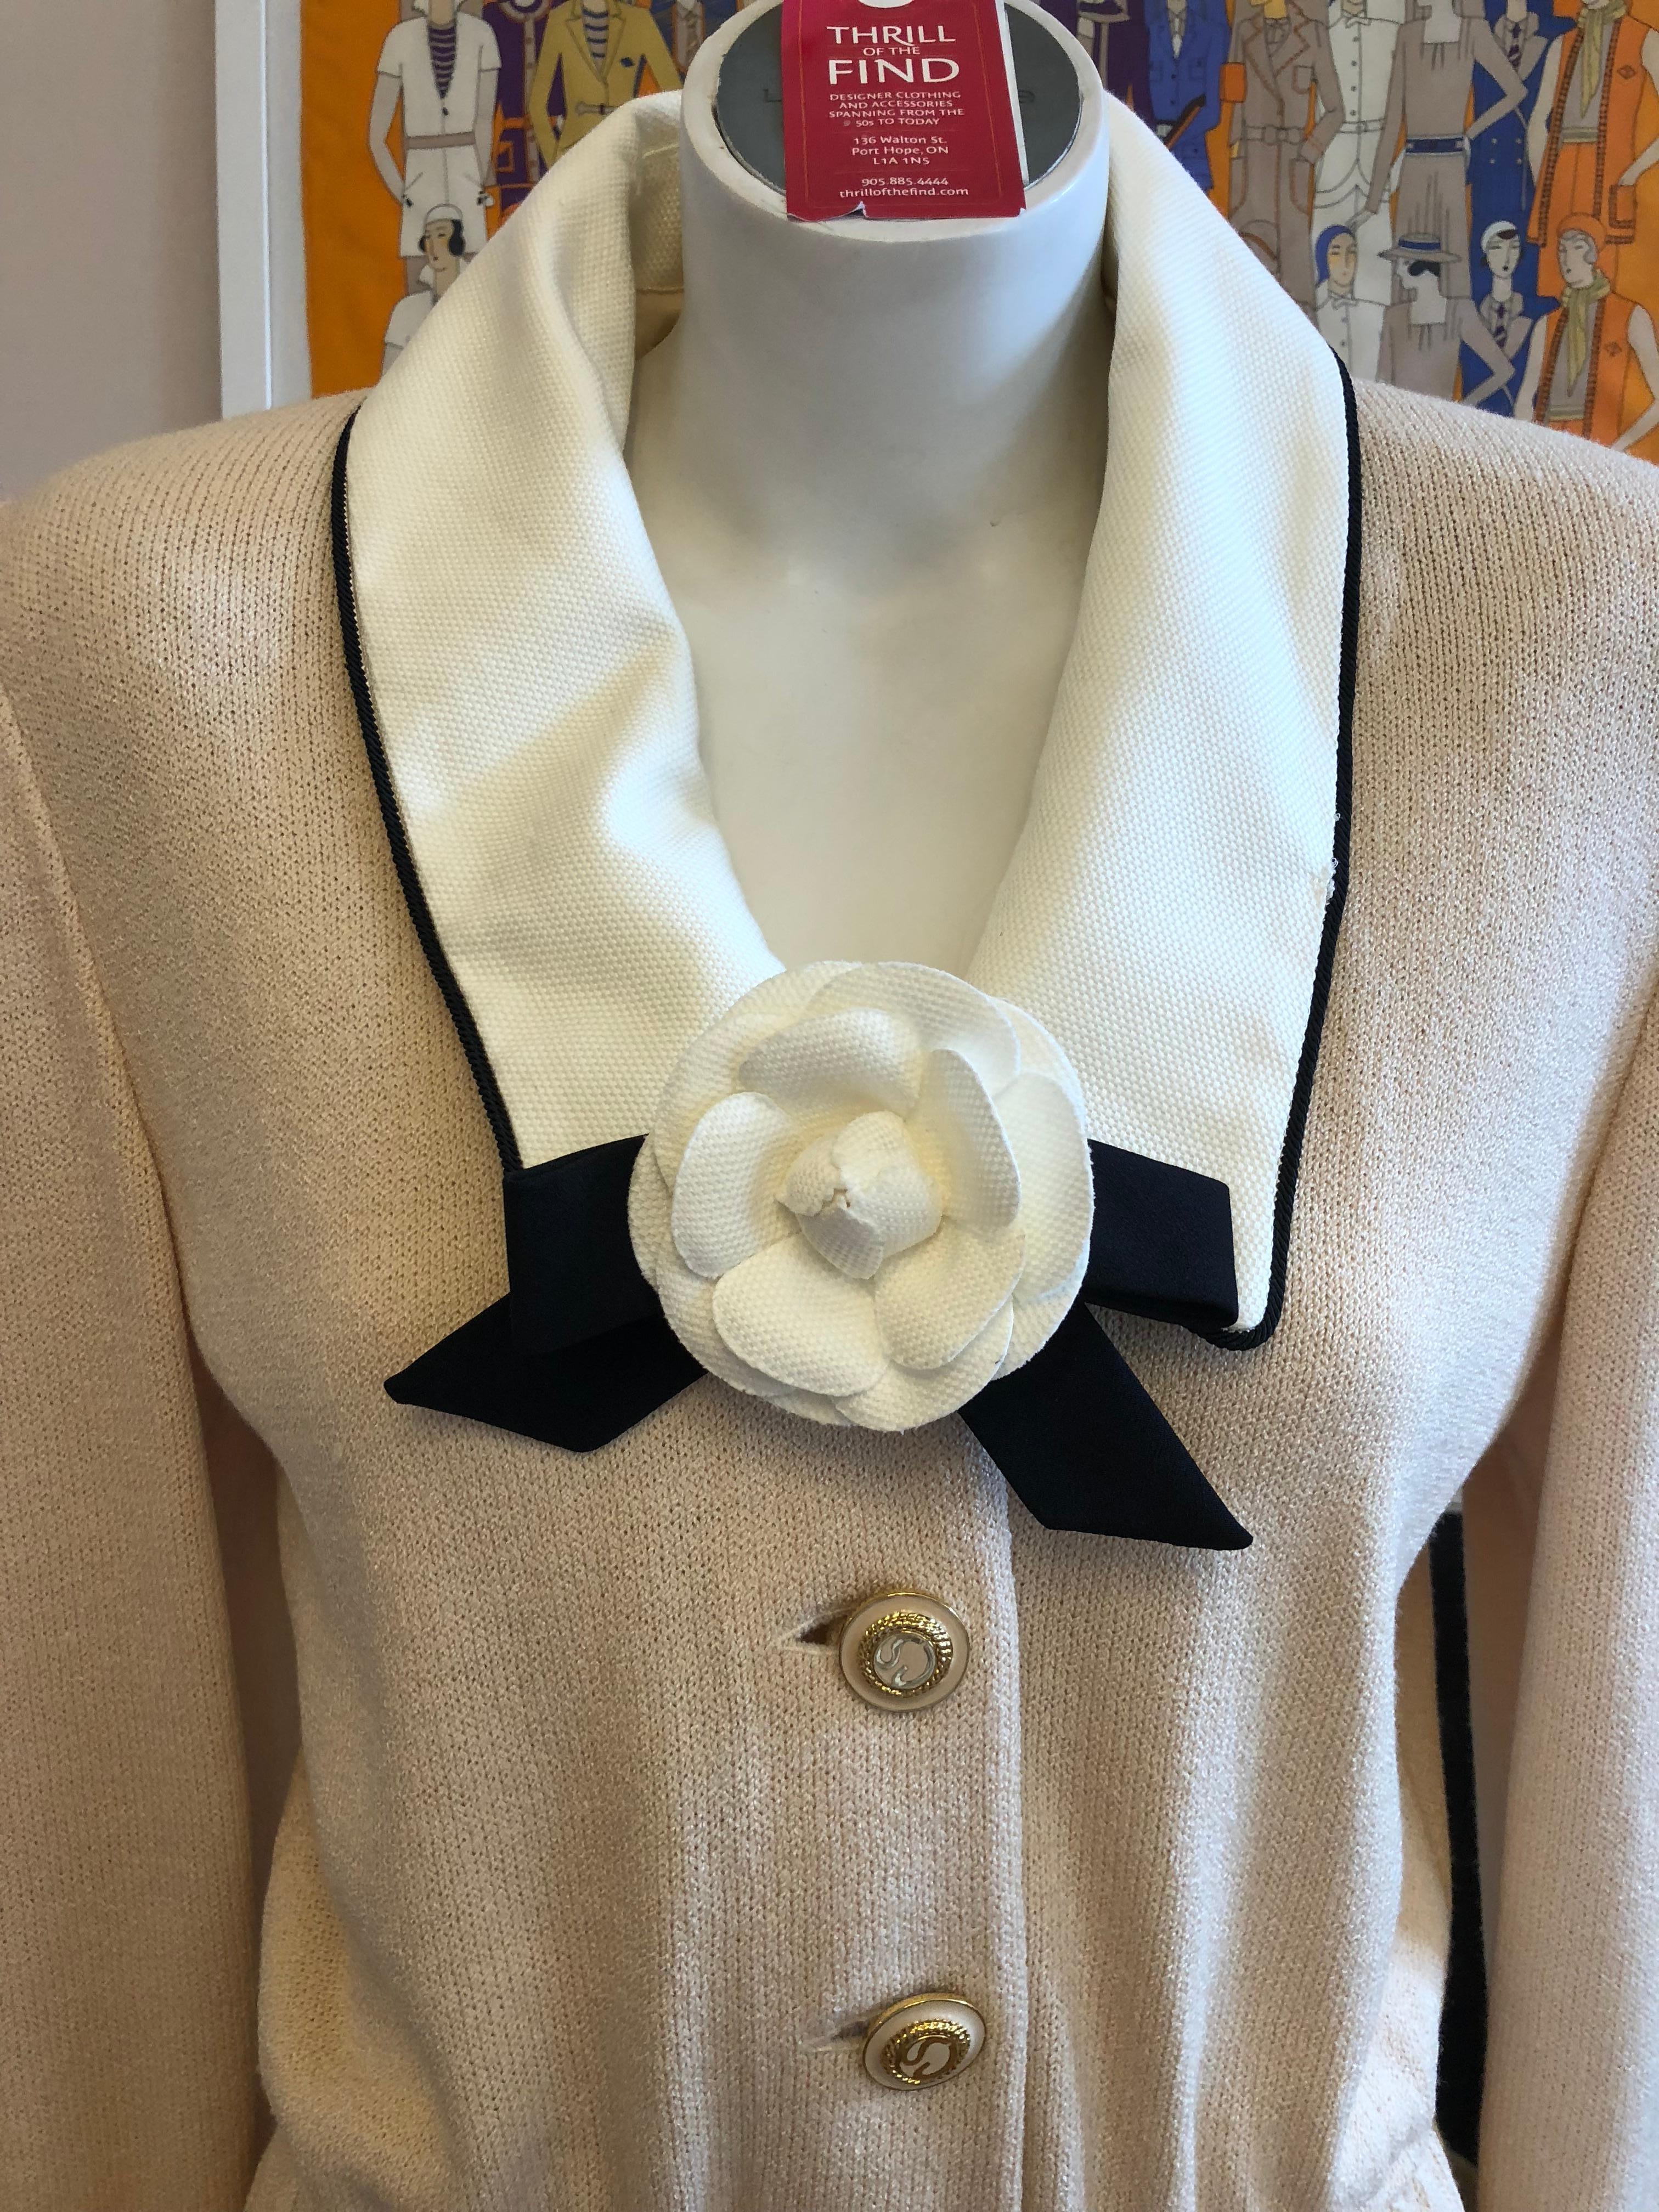 Lovely beige with a pink tinge Santana knit dress w/white with black trim pique cotton removable collar and cuffs. This dress also has a removable camellia brooch; three beautiful buttons at the front, and is made with 80% wool and 20% rayon.

St